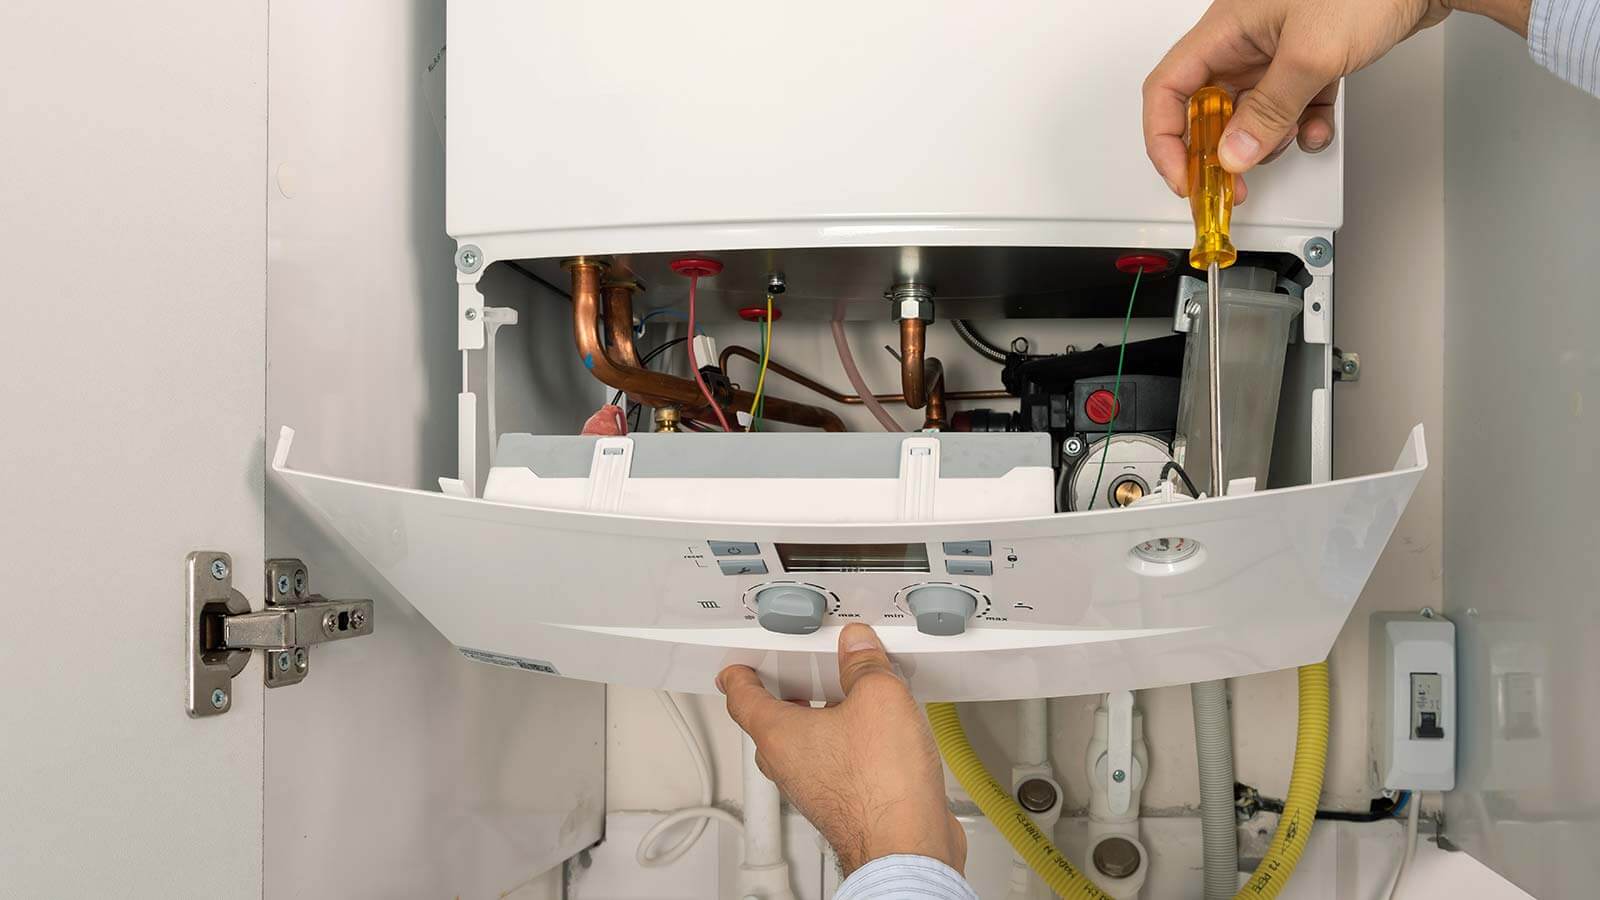 New Boiler Installation: What Can You Do?